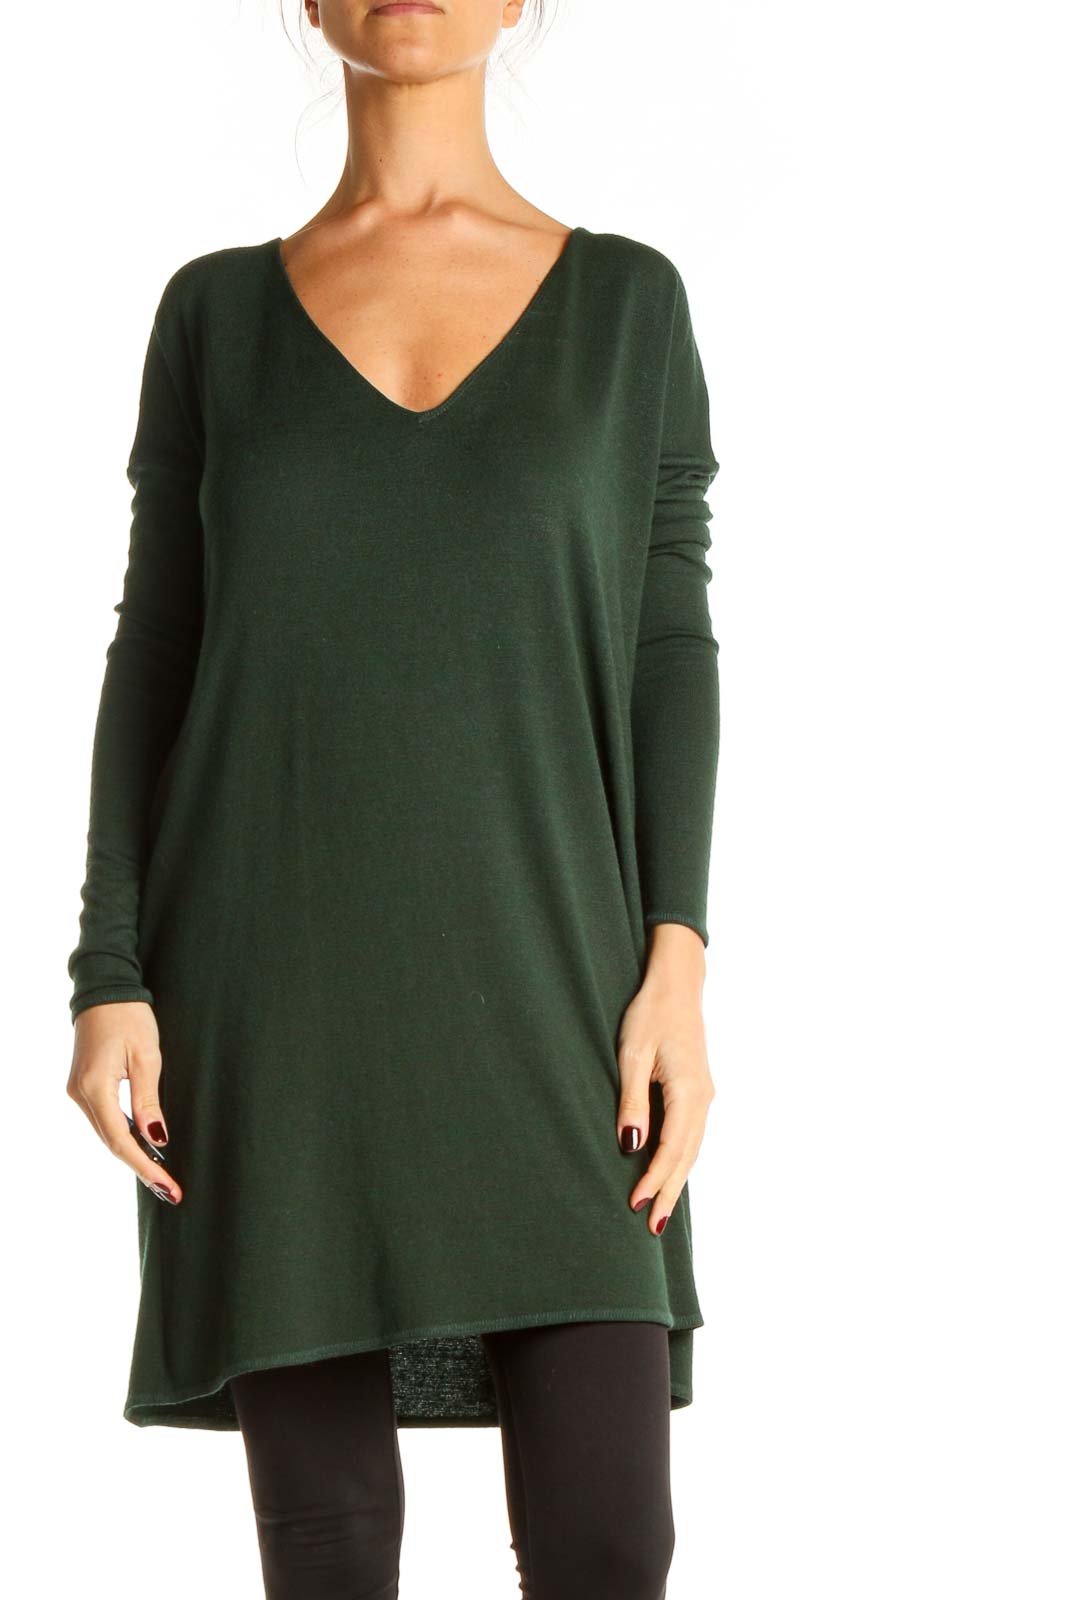 Green All Day Wear Long Sweater Front